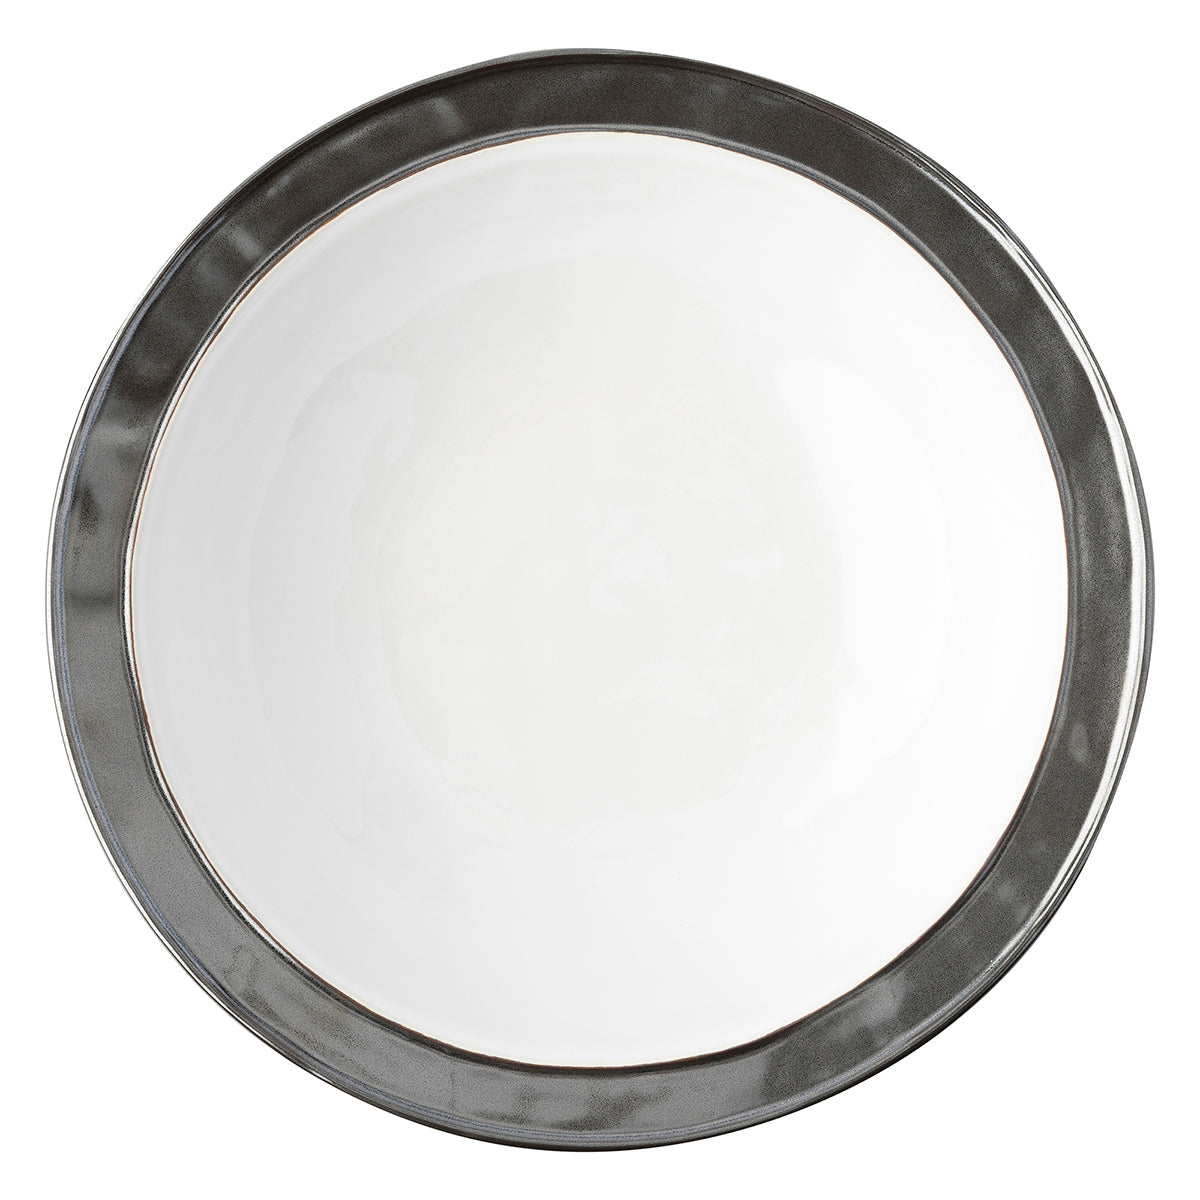 Emerson 13" Serving Bowl | 2nd